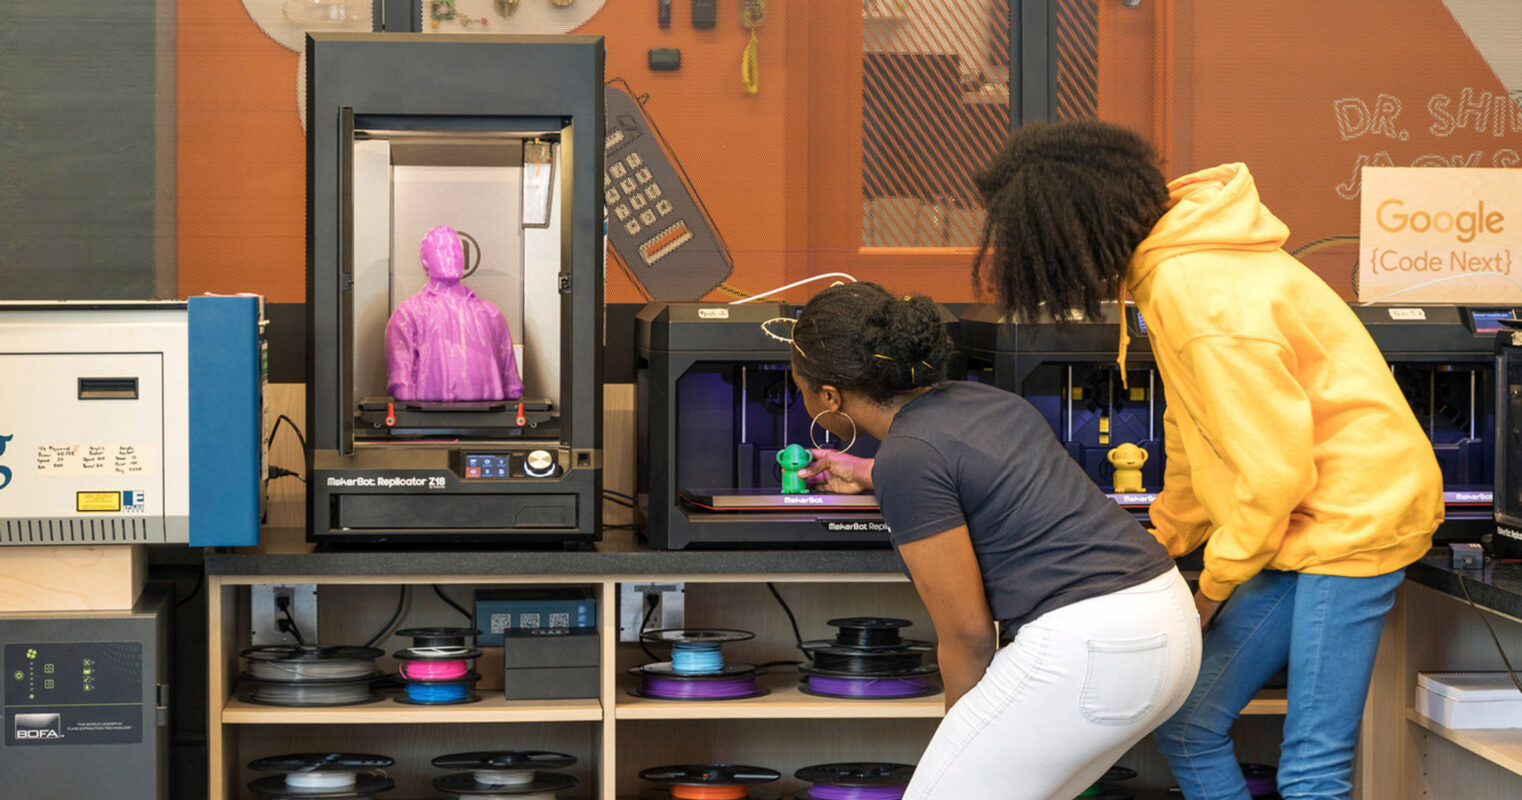 Two individuals observe a 3D printer in a modern maker space, featuring vibrant spools of filament on shelving and a range of prototyping equipment indicative of an innovative learning environment.